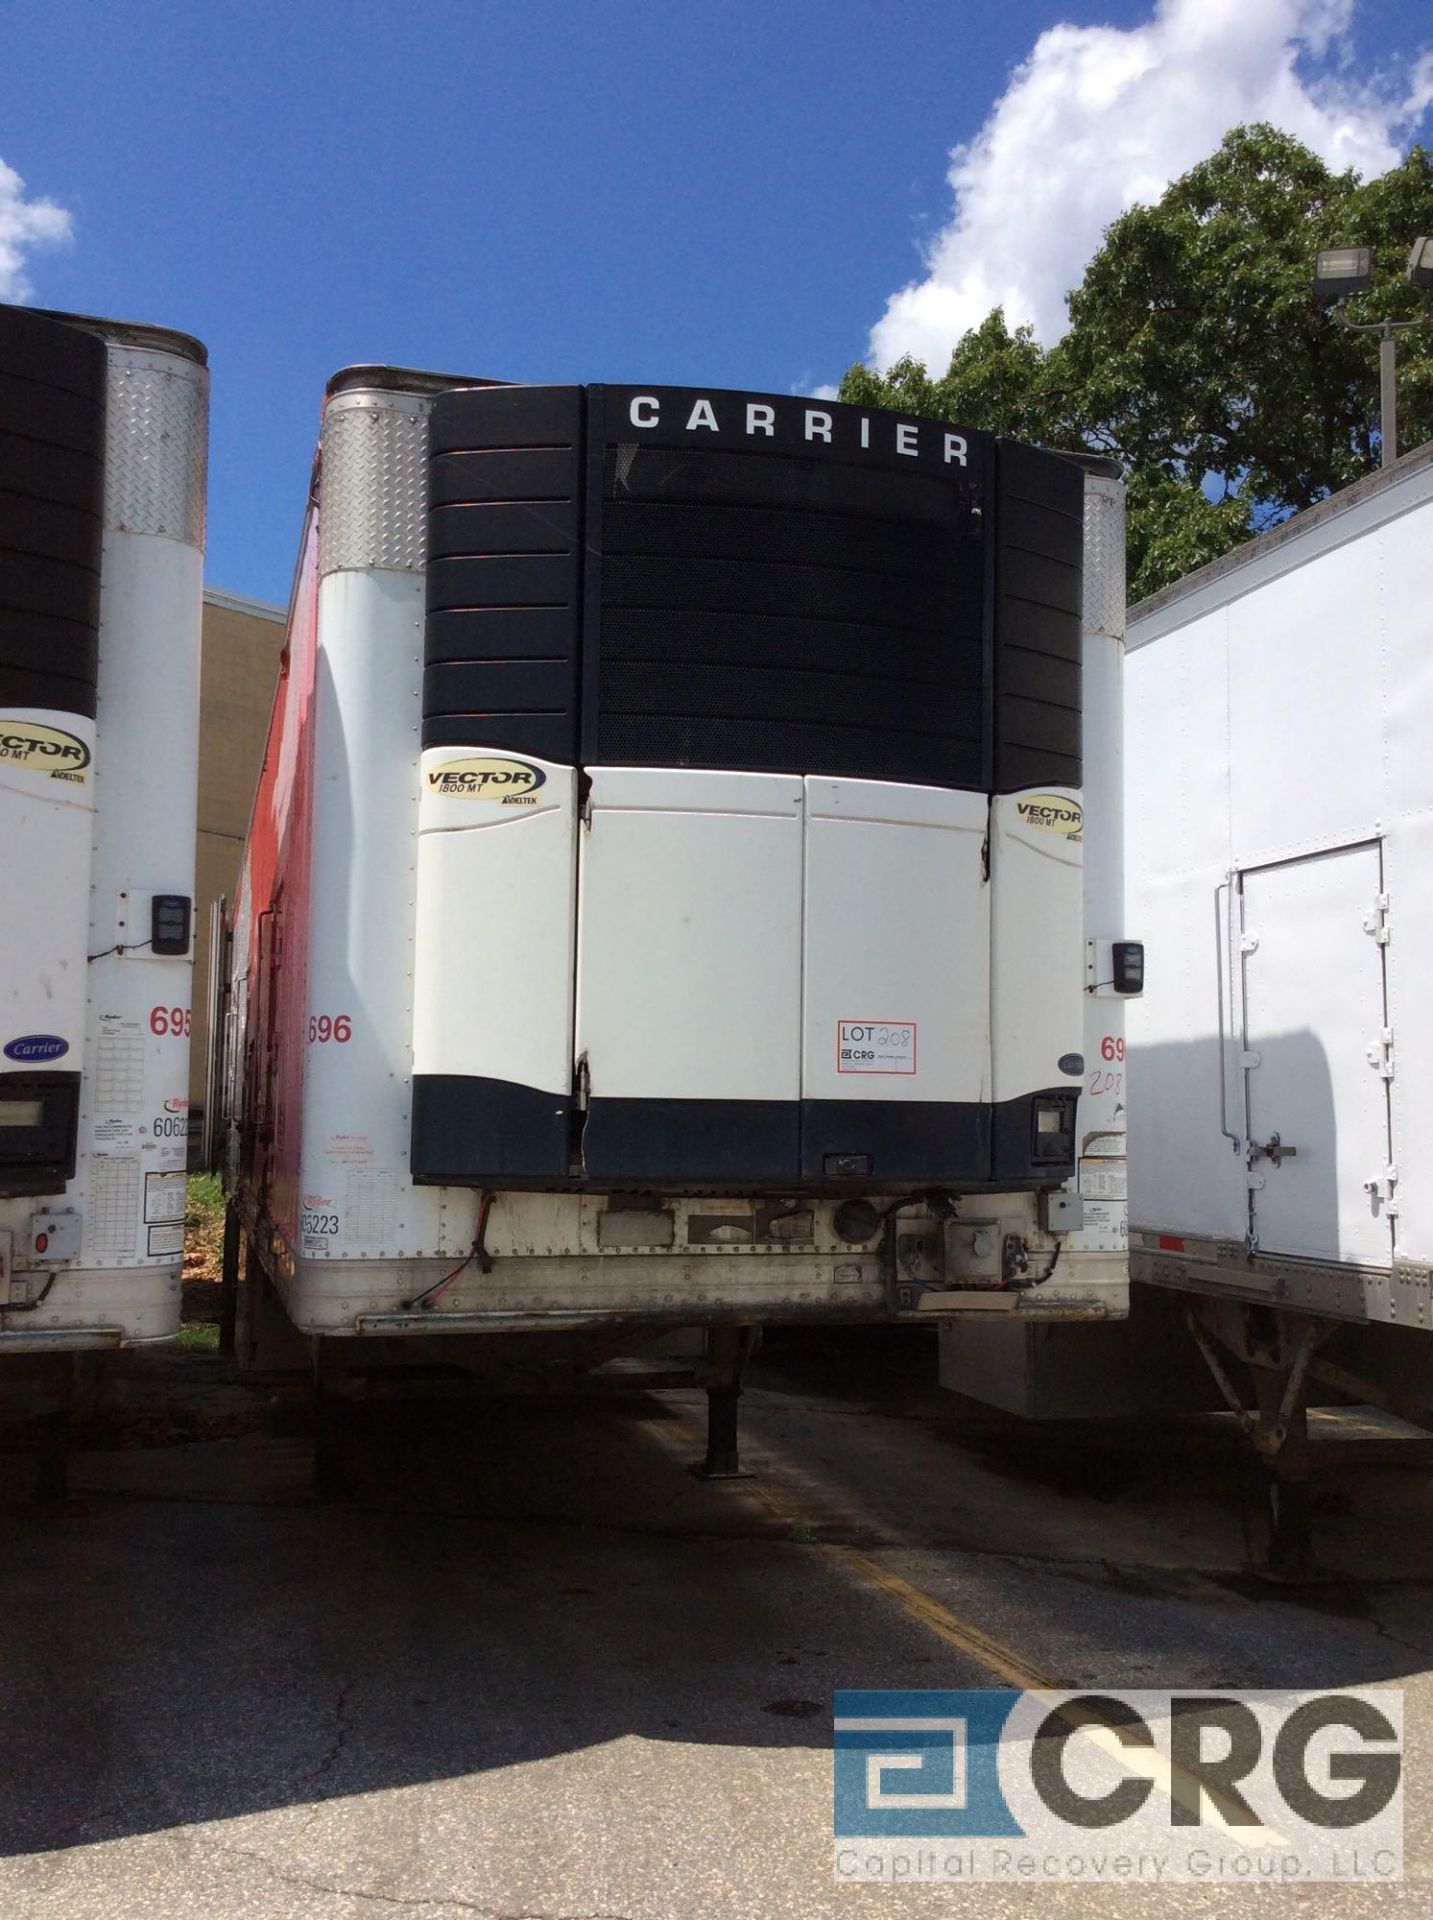 2009 Great Dane Multi Temp Refrigerated Semi Trailer - 45 Long, 102" wide, Carrier Vector 1800MT - Image 5 of 5